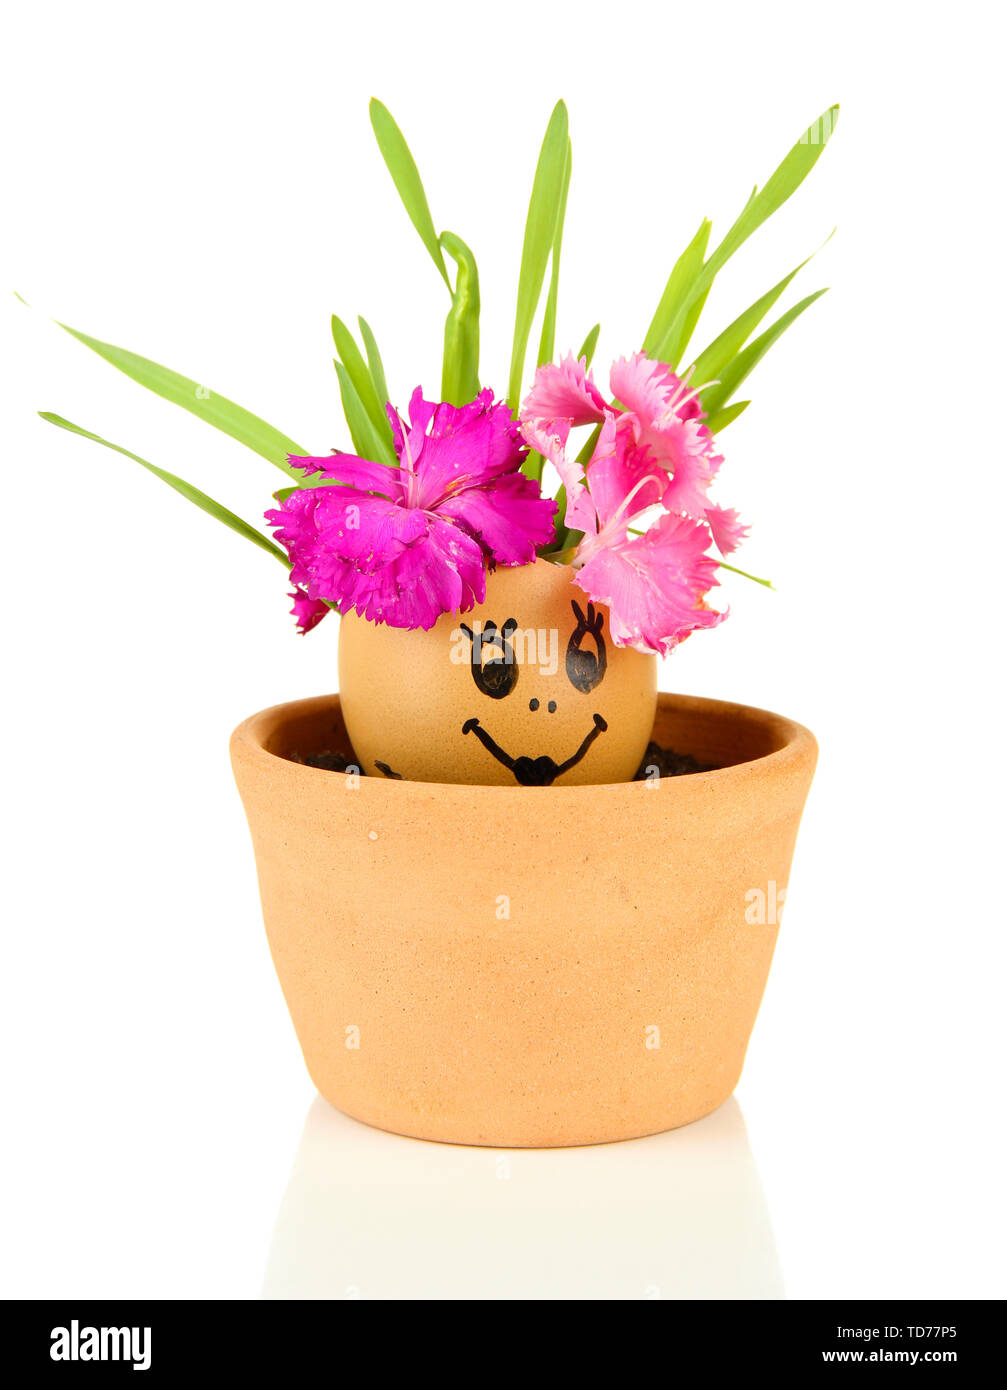 Flowers growing from egg shell with painted face, on bright background Stock Photo